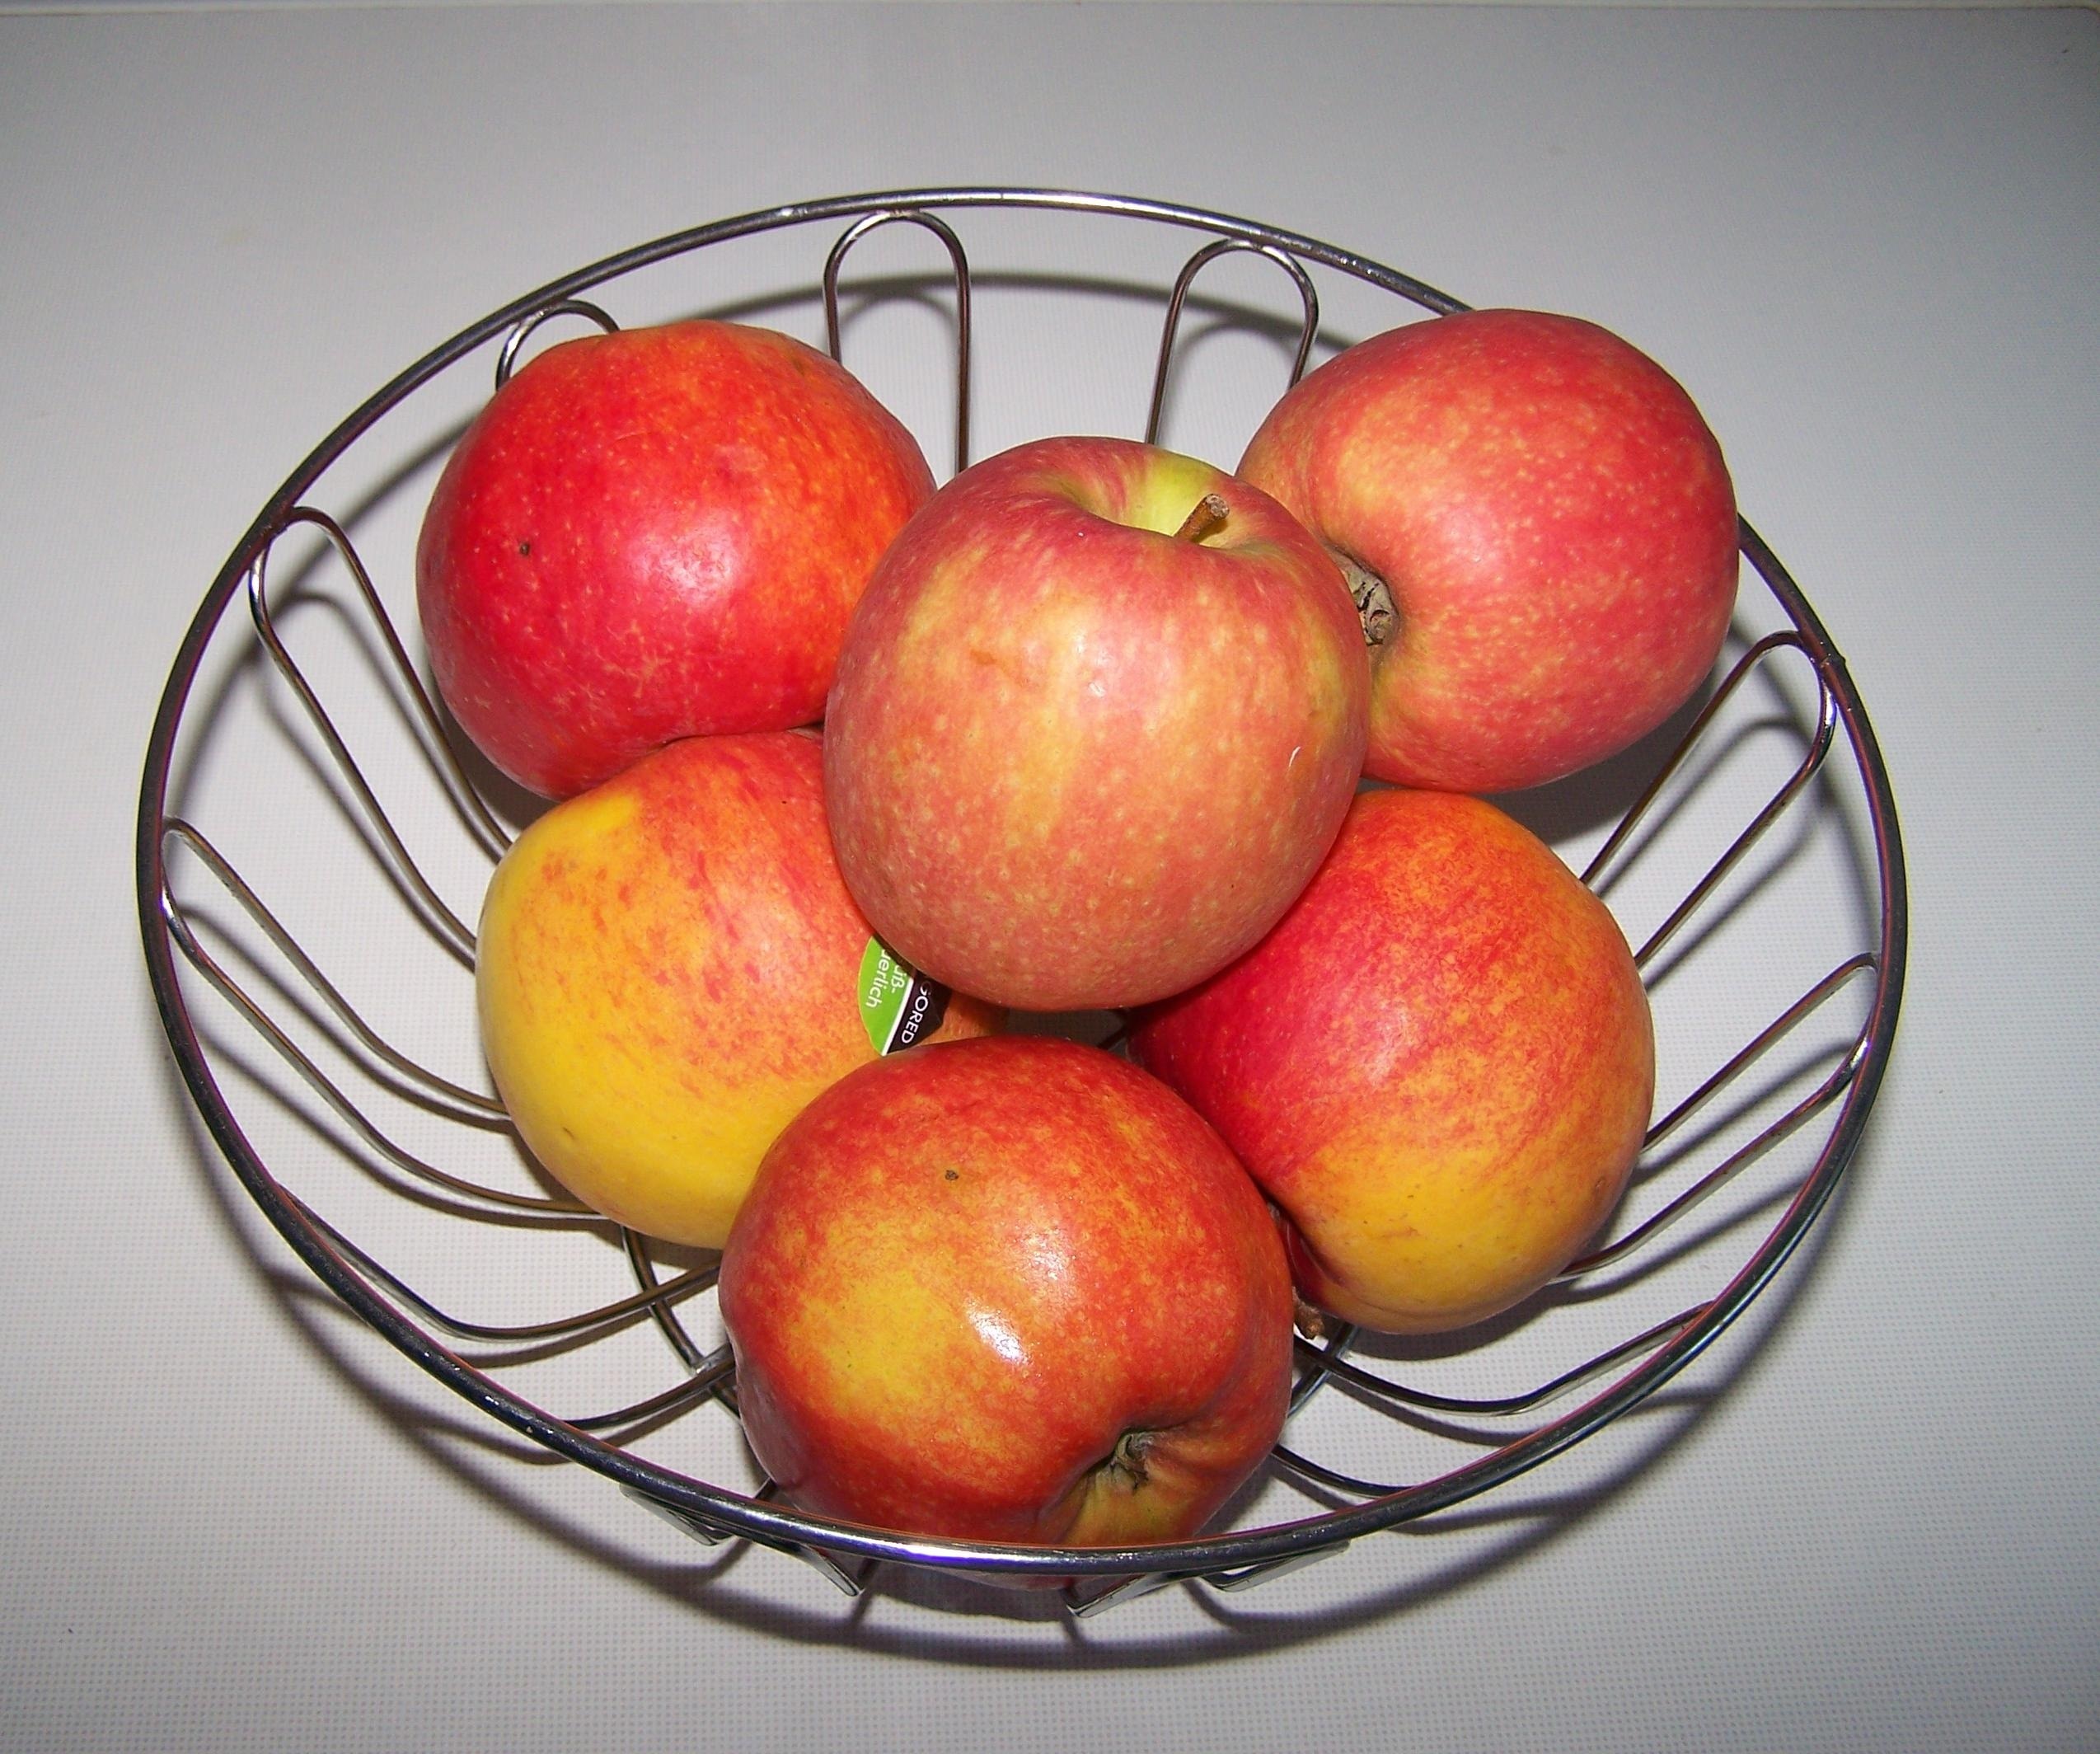 six red apples